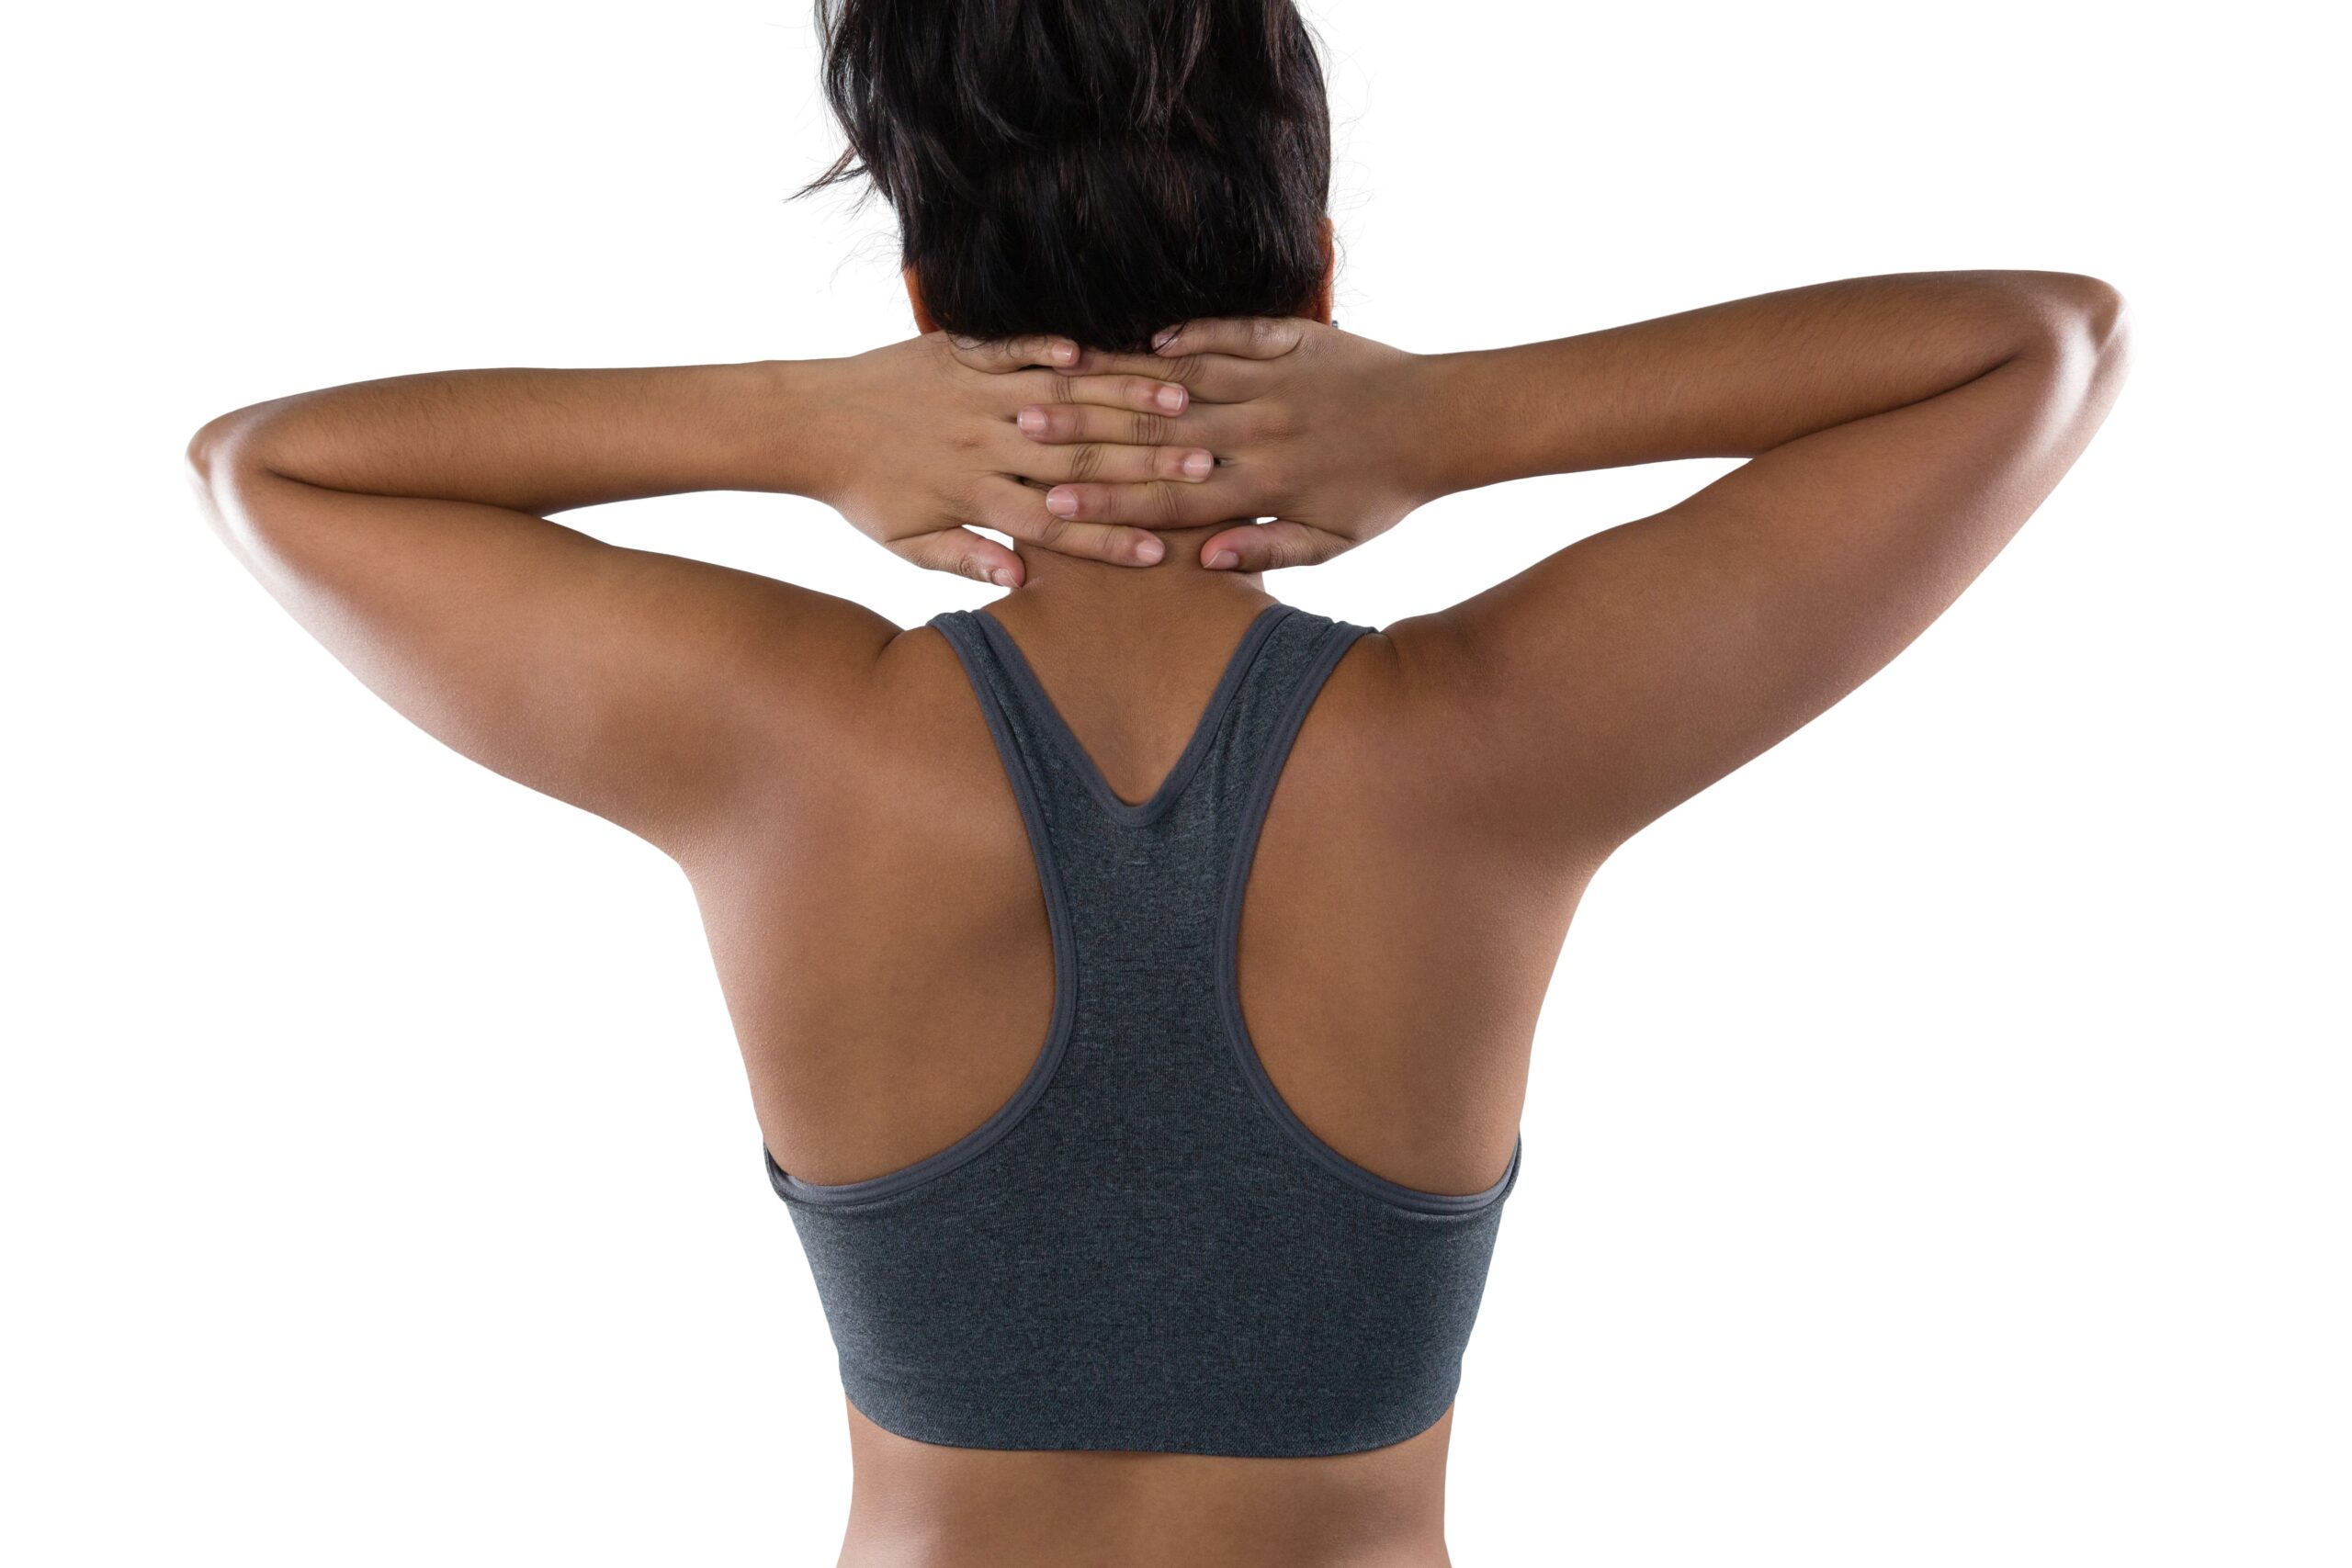 Can wearing bras cause shoulder pain? If so, what bras are best